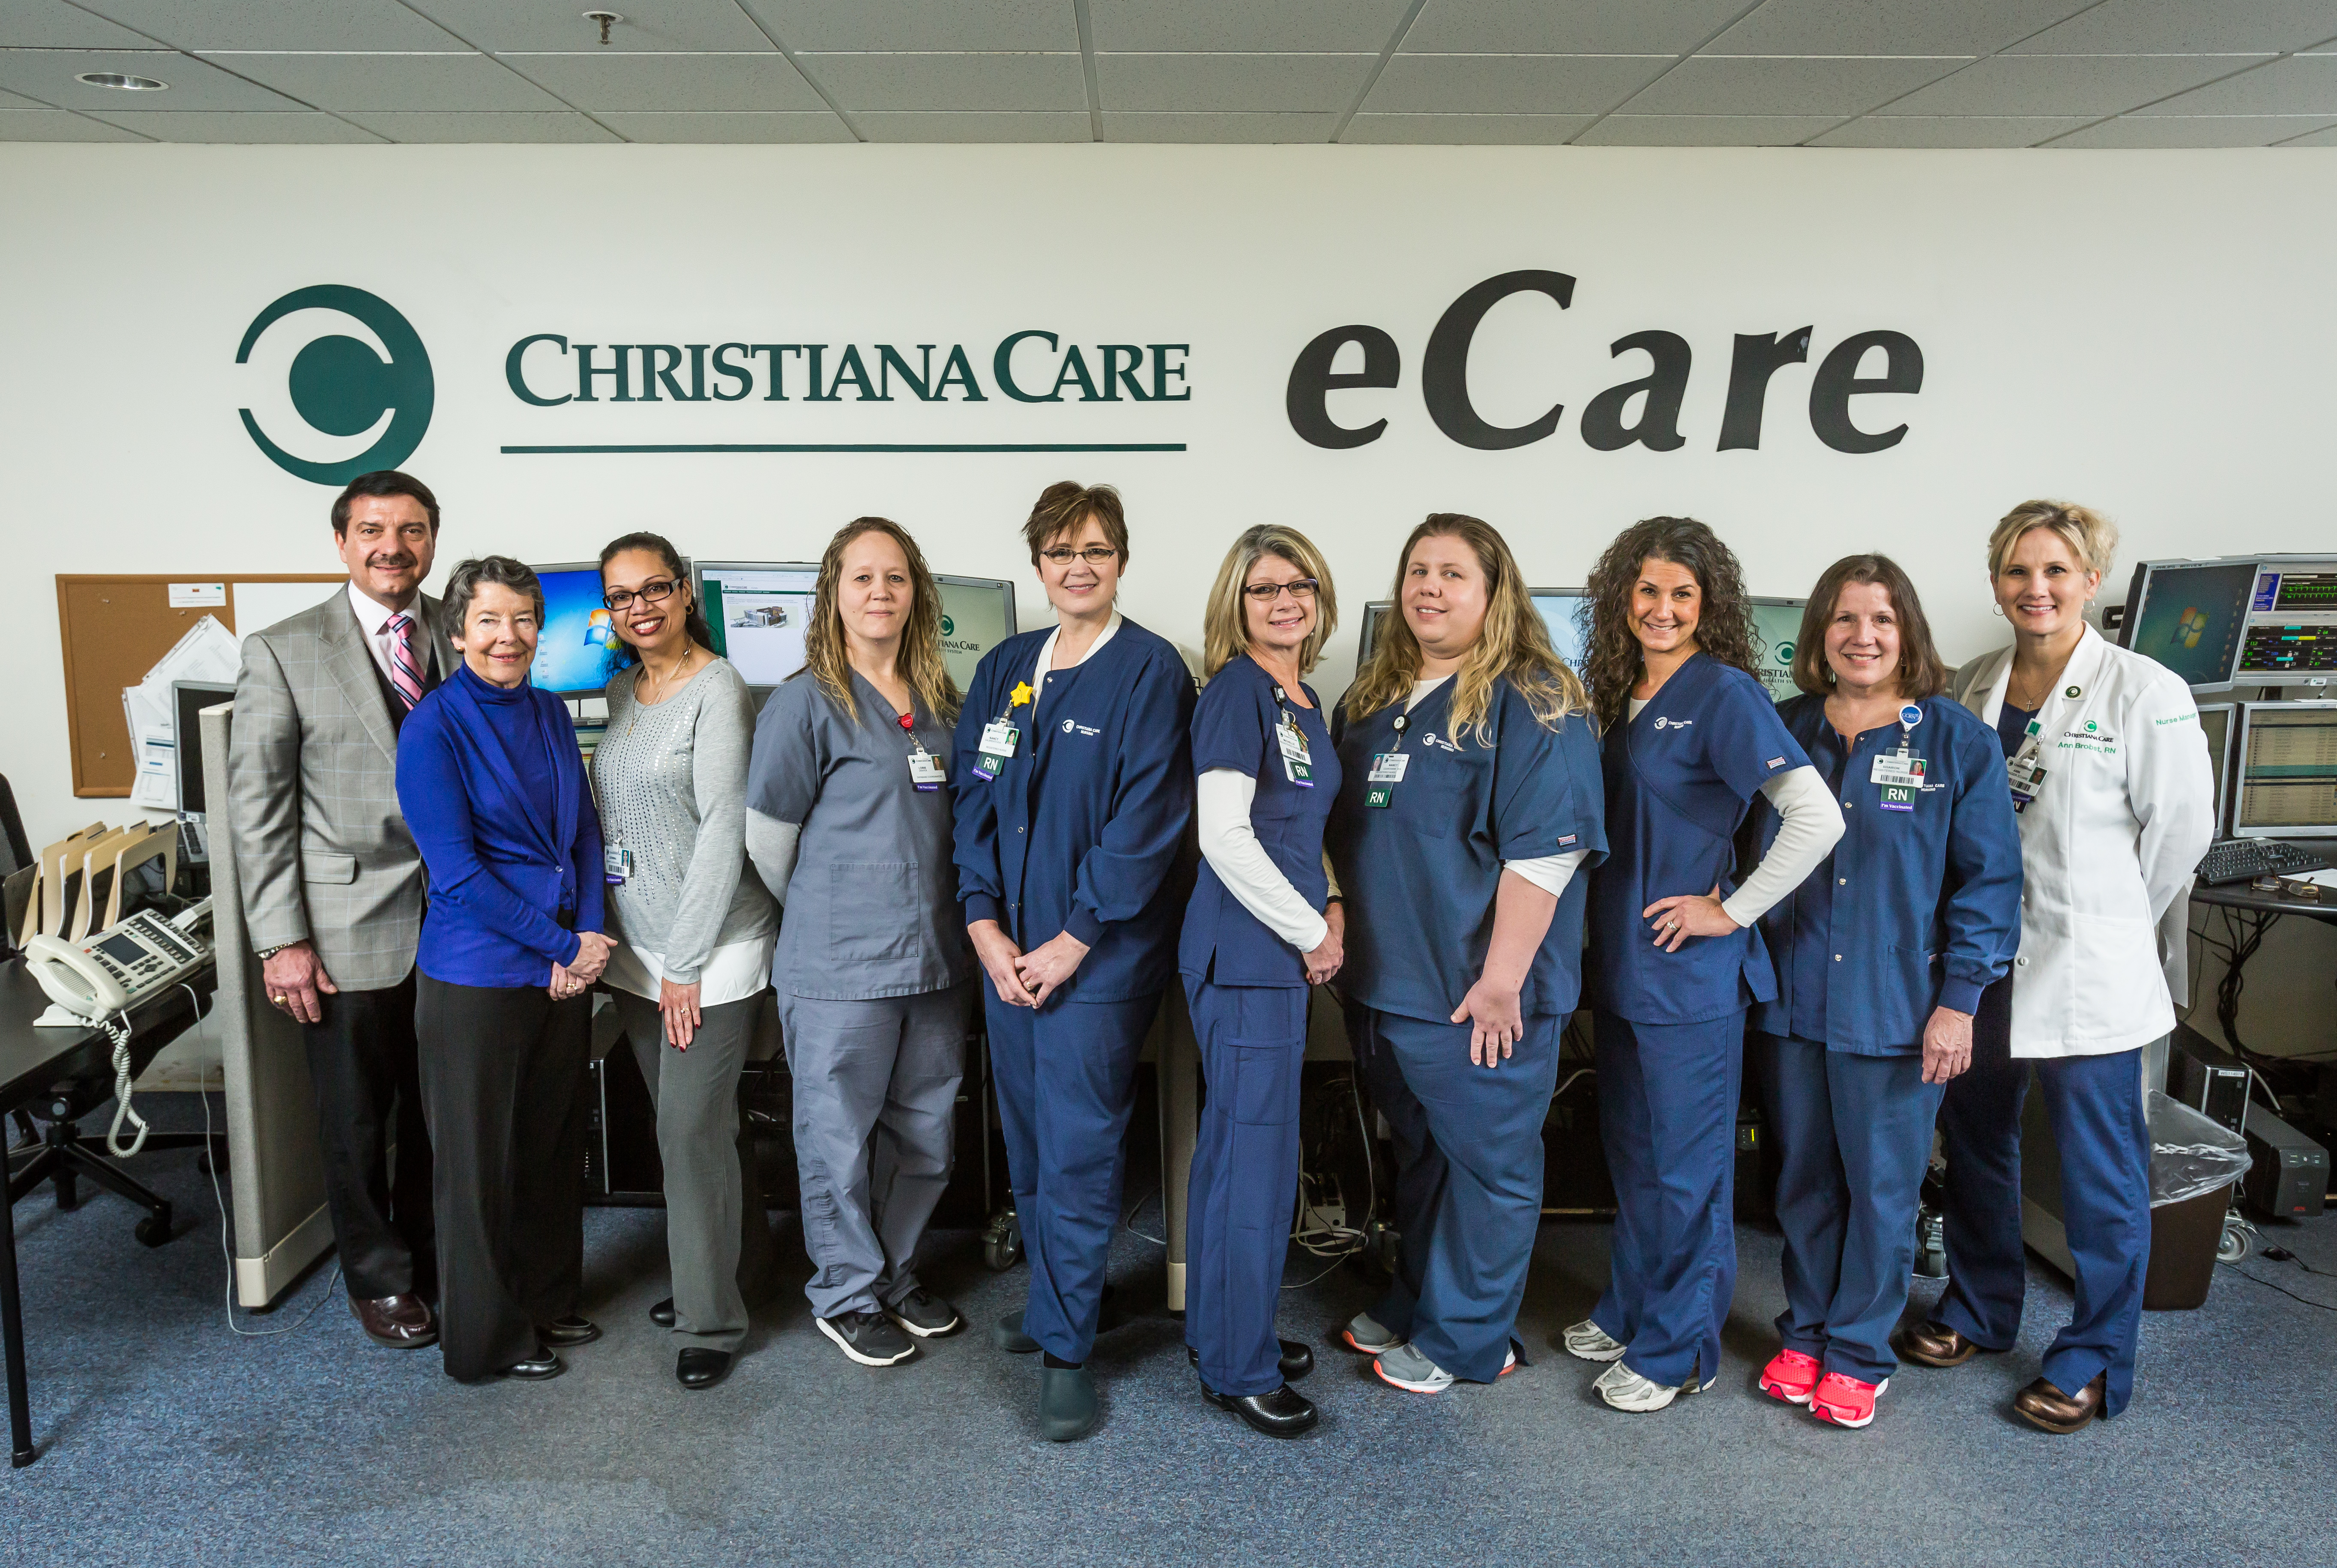 Albert Rizzo, M.D., medical director of eCare, and Virginia U. Collier, M.D., MACP, Hugh R. Sharp Jr. Chair of the Department of Medicine, joined eCare team for a 10th Anniversary photo, including Gemma Lowery Administrative Assistant VIII, Lori Draper, database coordinator, Nancy Galbreath BSN, RN, CCRN, Michelle Zechman BSN, RN, CCRN, Nancy Courchaine RN, Cheri Morrow RN CCRN, Sharon Finnegan BSN, RN, CCRN, and Ann Brobst MSN, RN, PCCN, nurse manager.